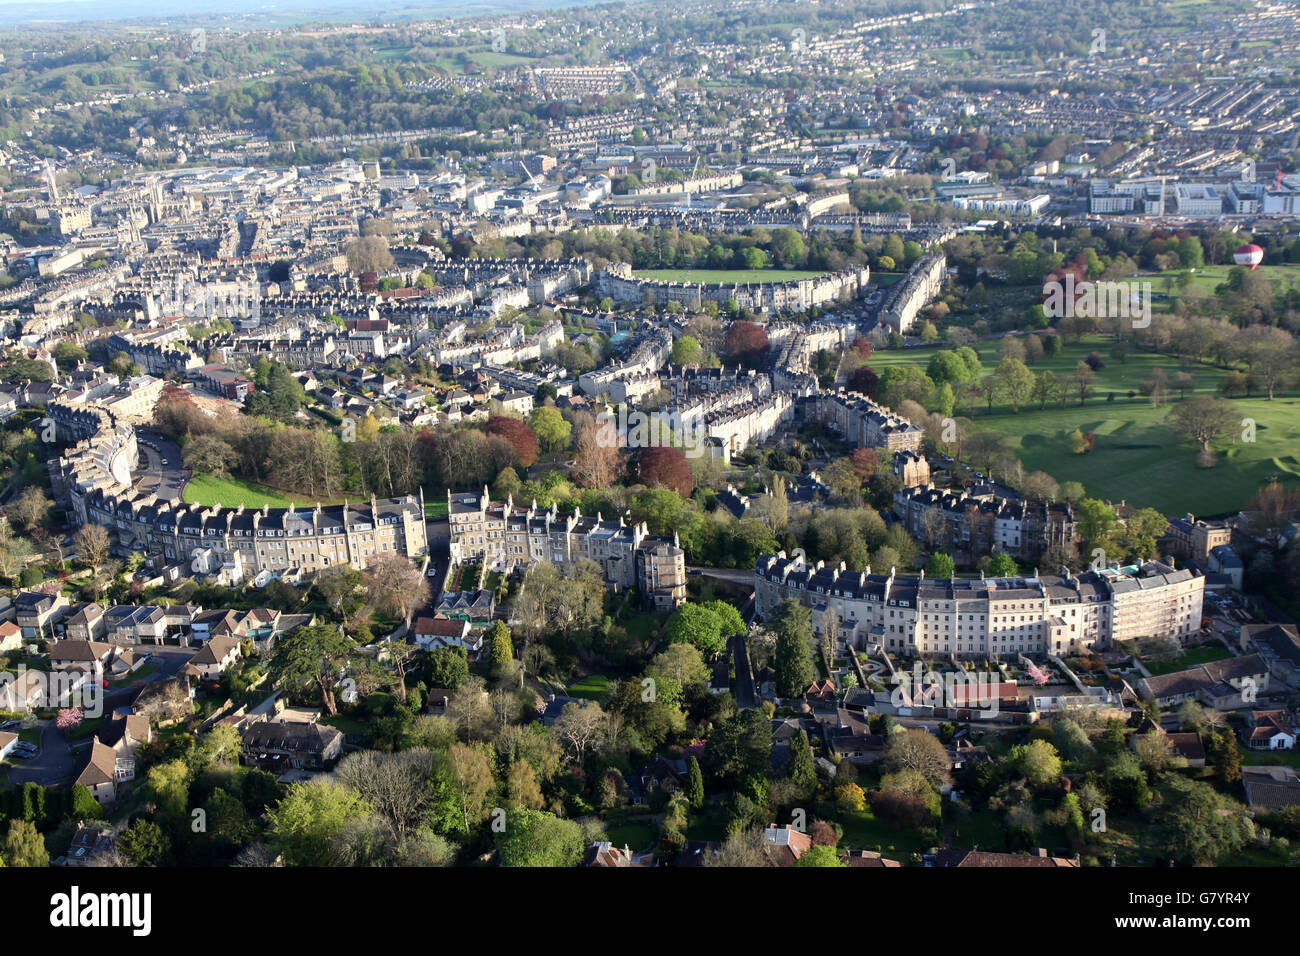 View of the City of Bath from a hot air balloon high overhead showing the extraordinary architecture and green spaces the place Stock Photo